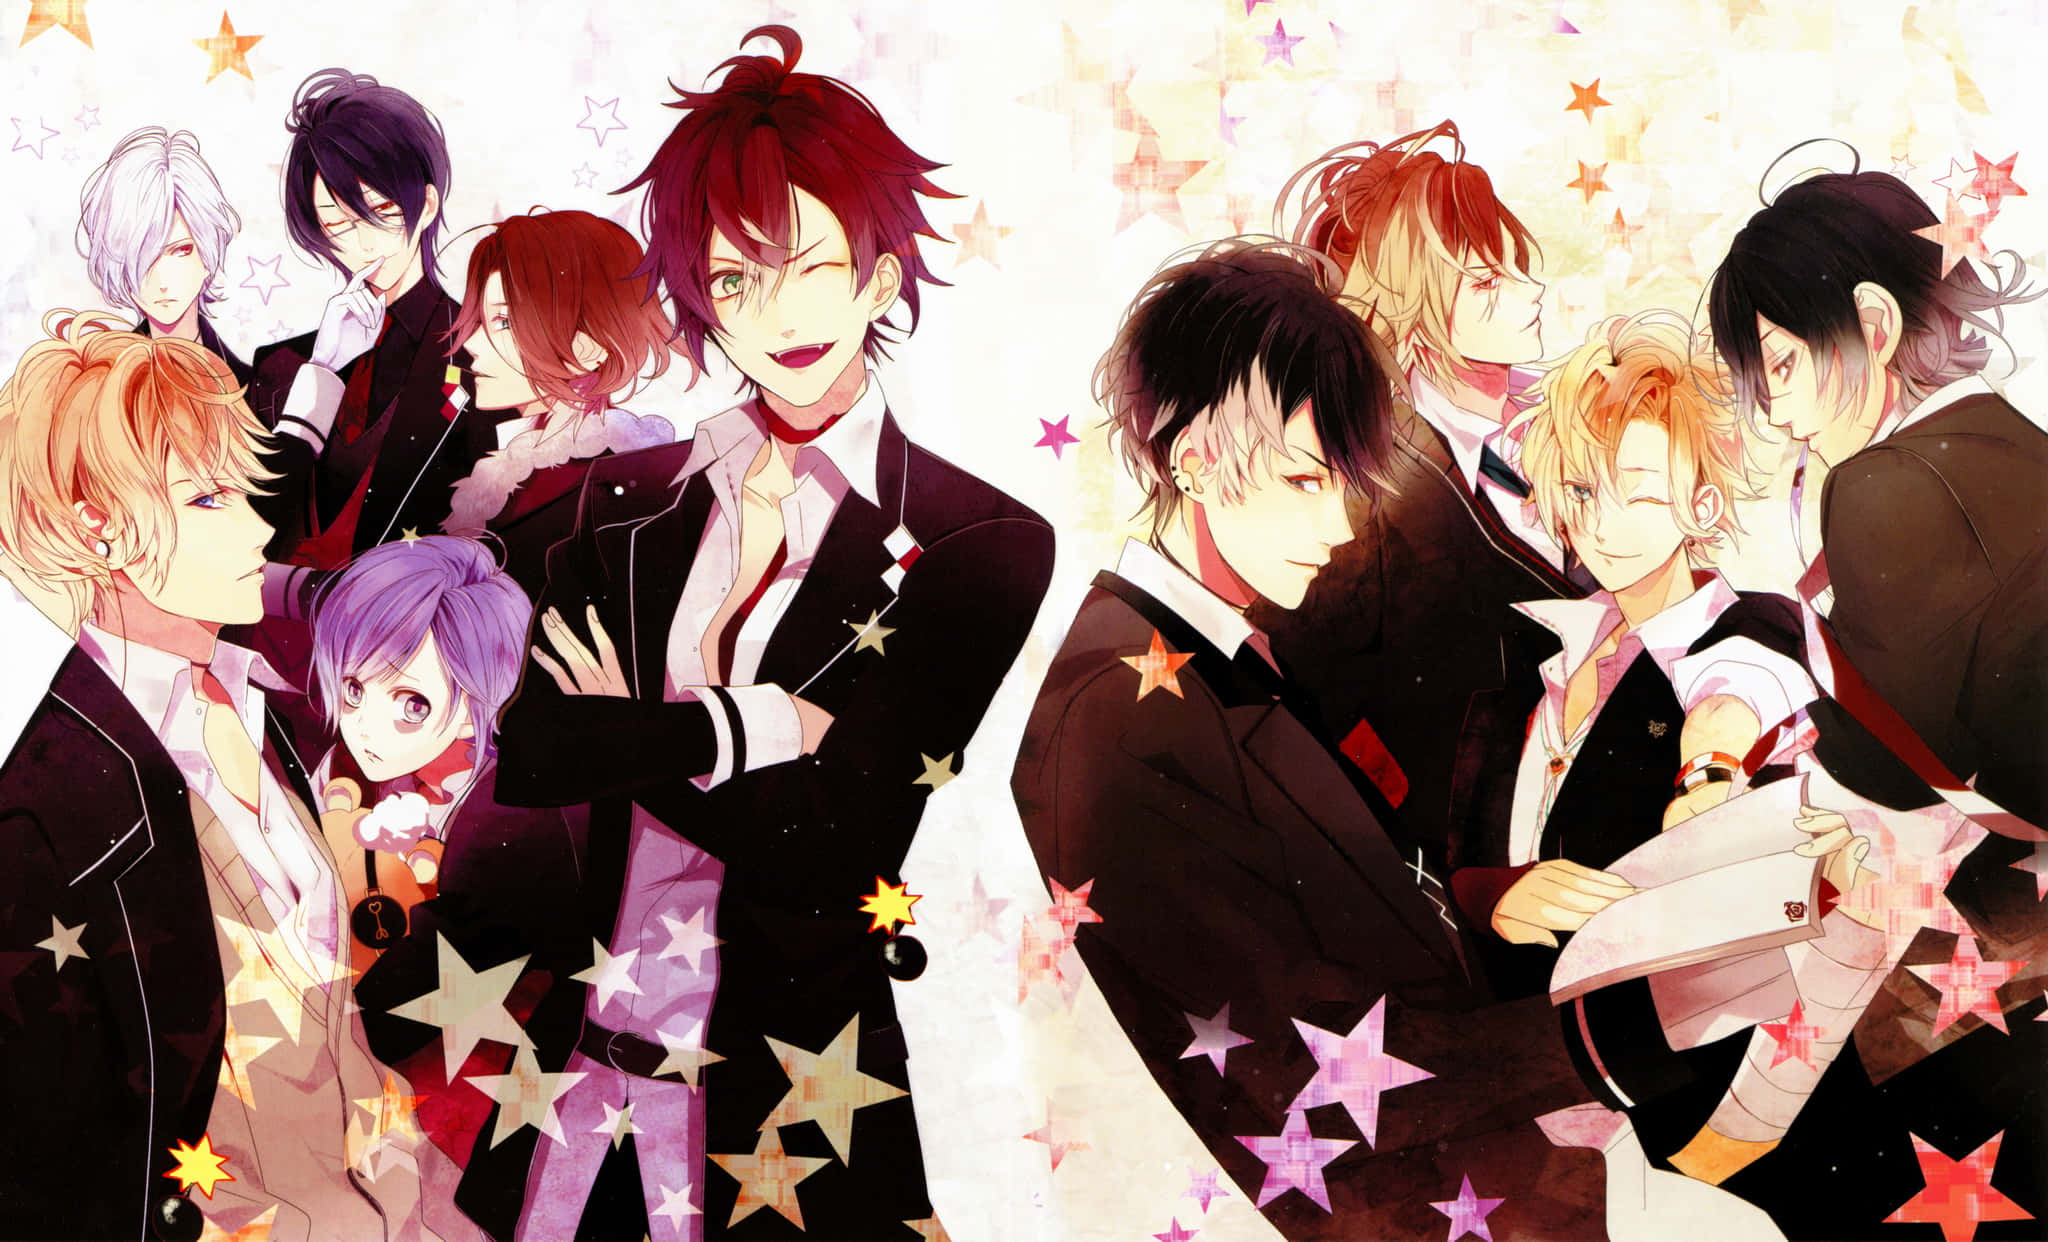 A Group Of Anime Characters In Suits And Ties